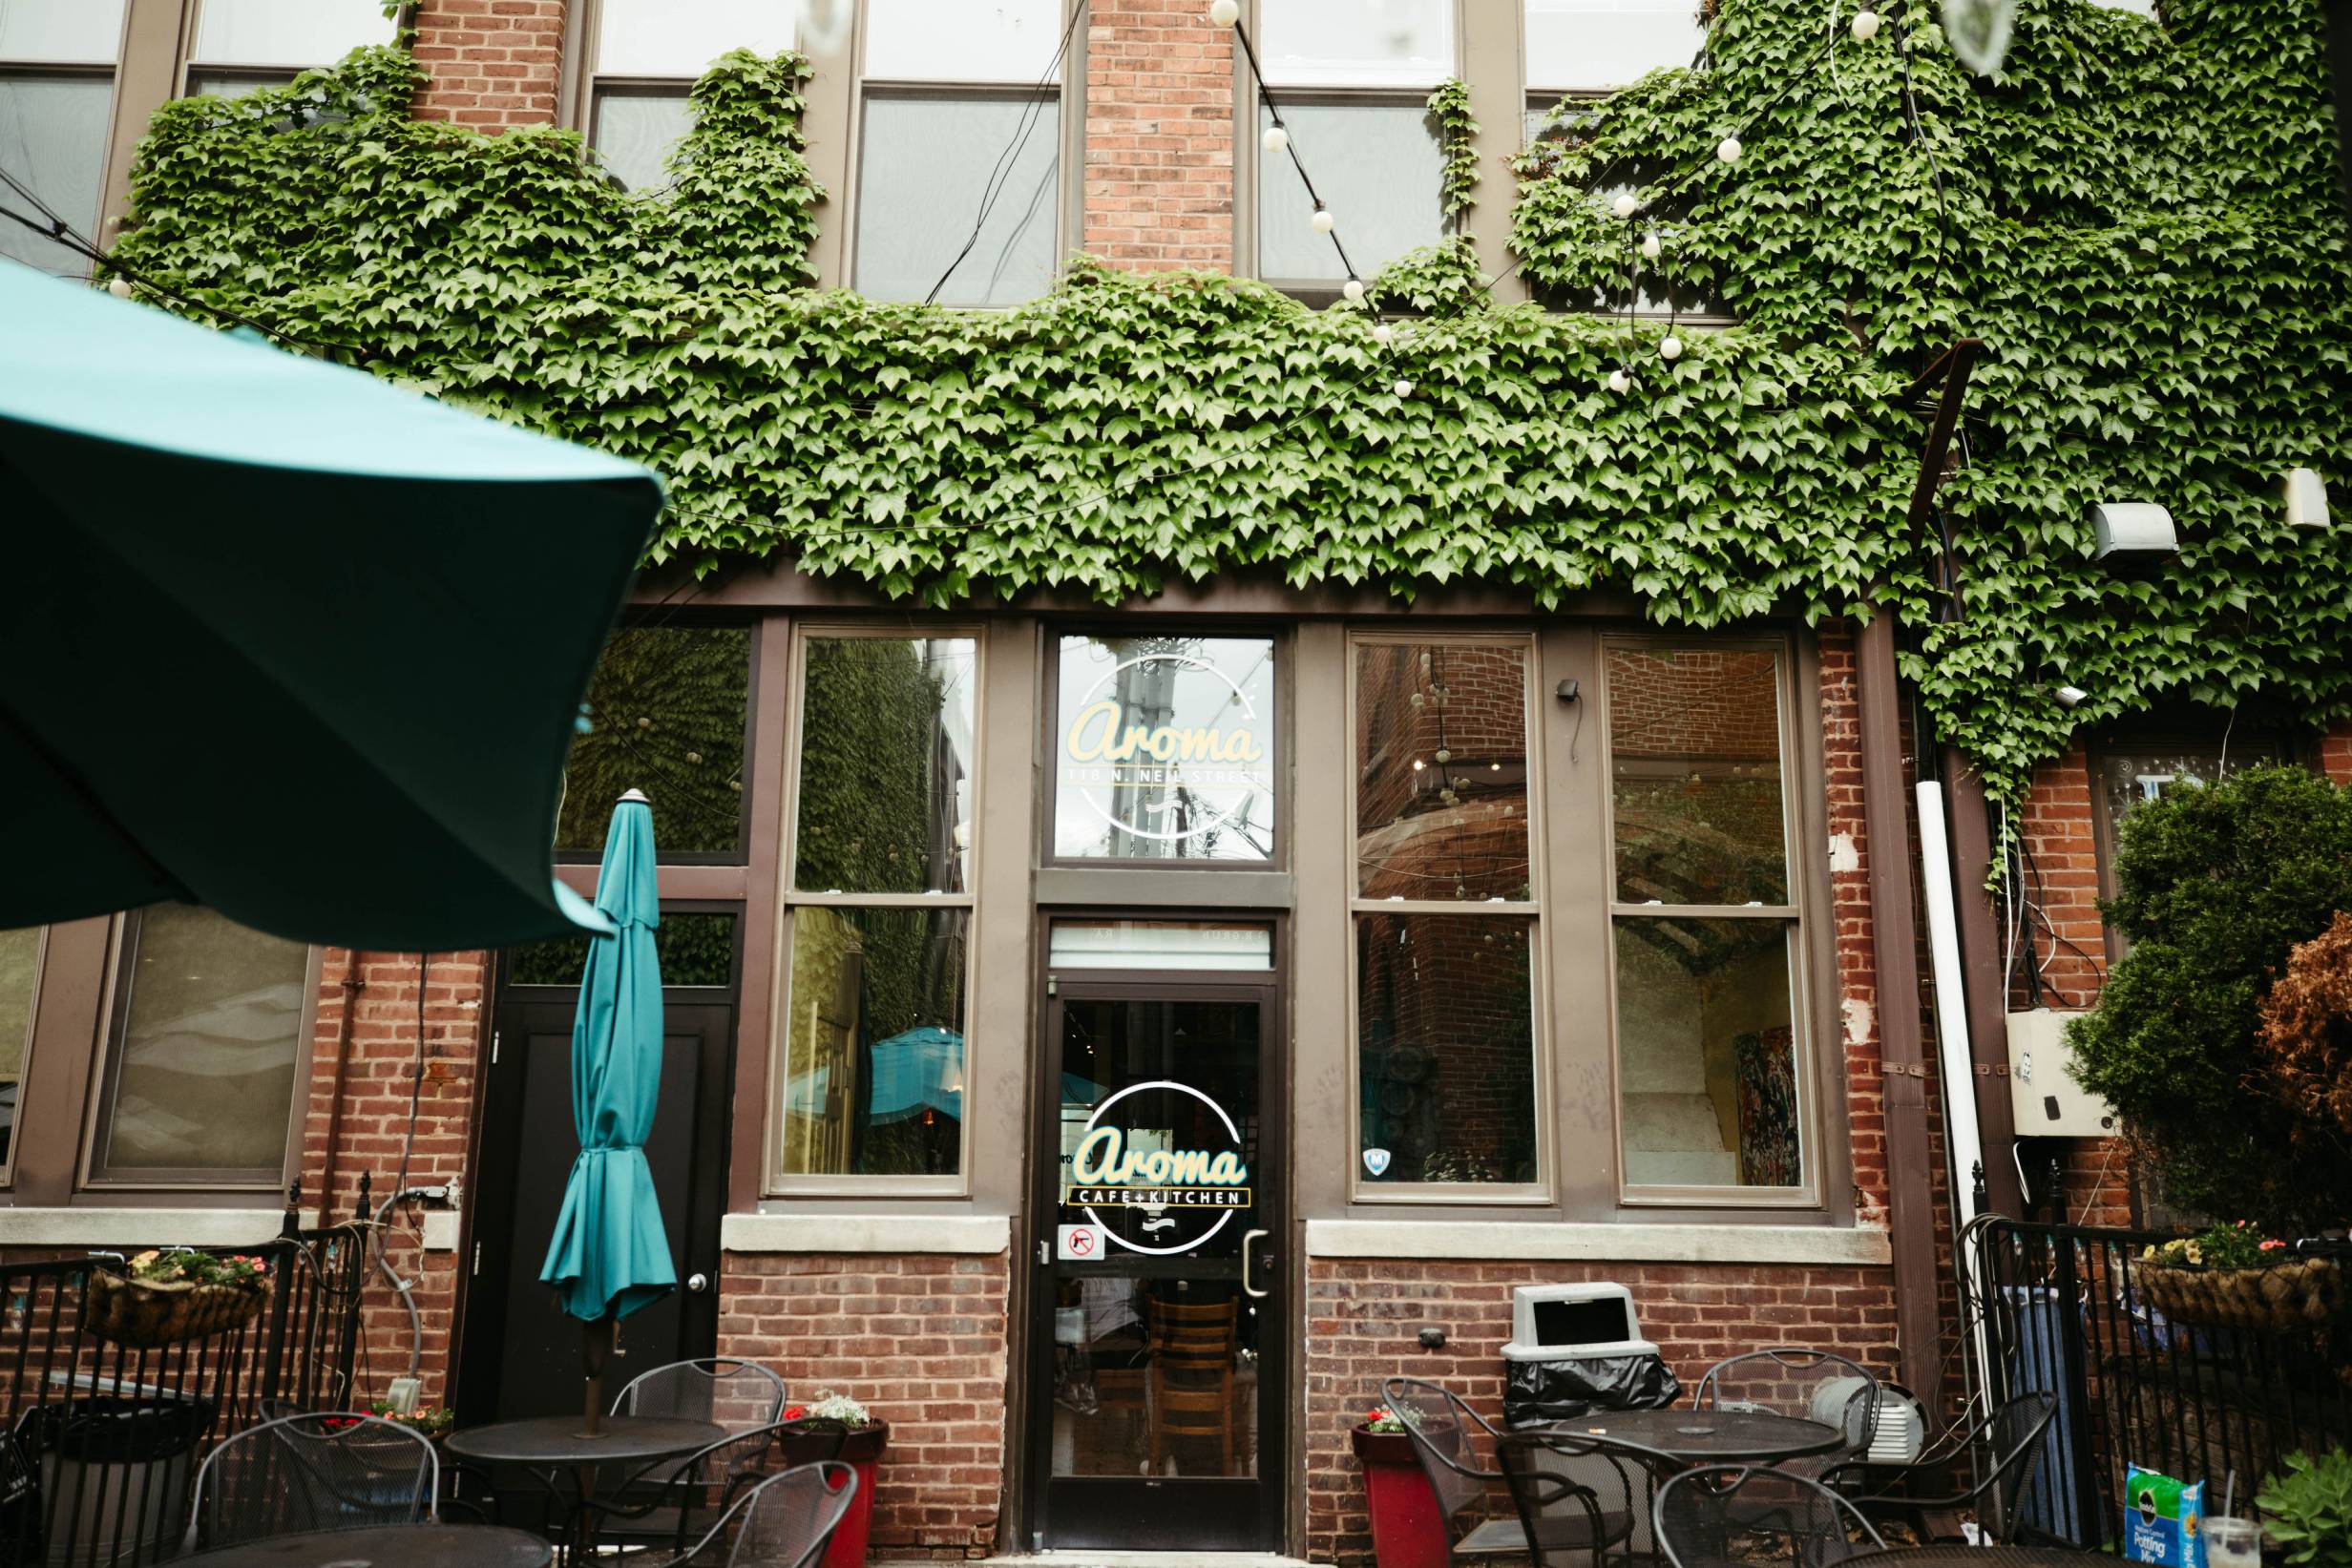 The exterior of Aroma Cafe with lots of greenery. Photo by Anna Longworth.